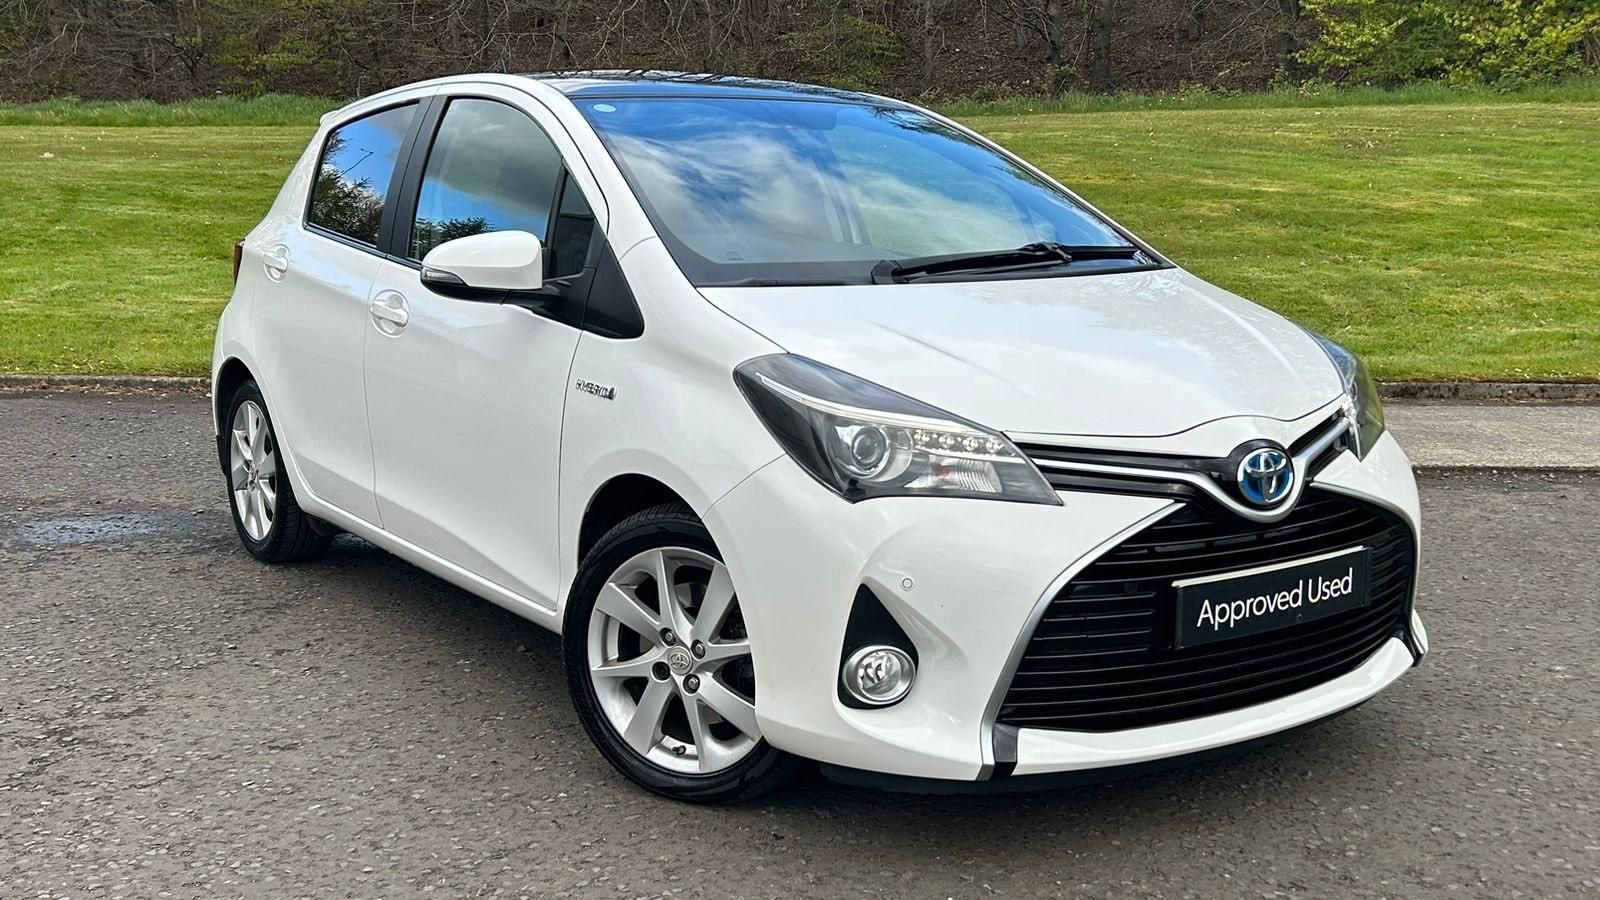 Toyota Yaris 1.5 VVT-h Excel E-CVT Euro 6 5dr (15in Alloy)